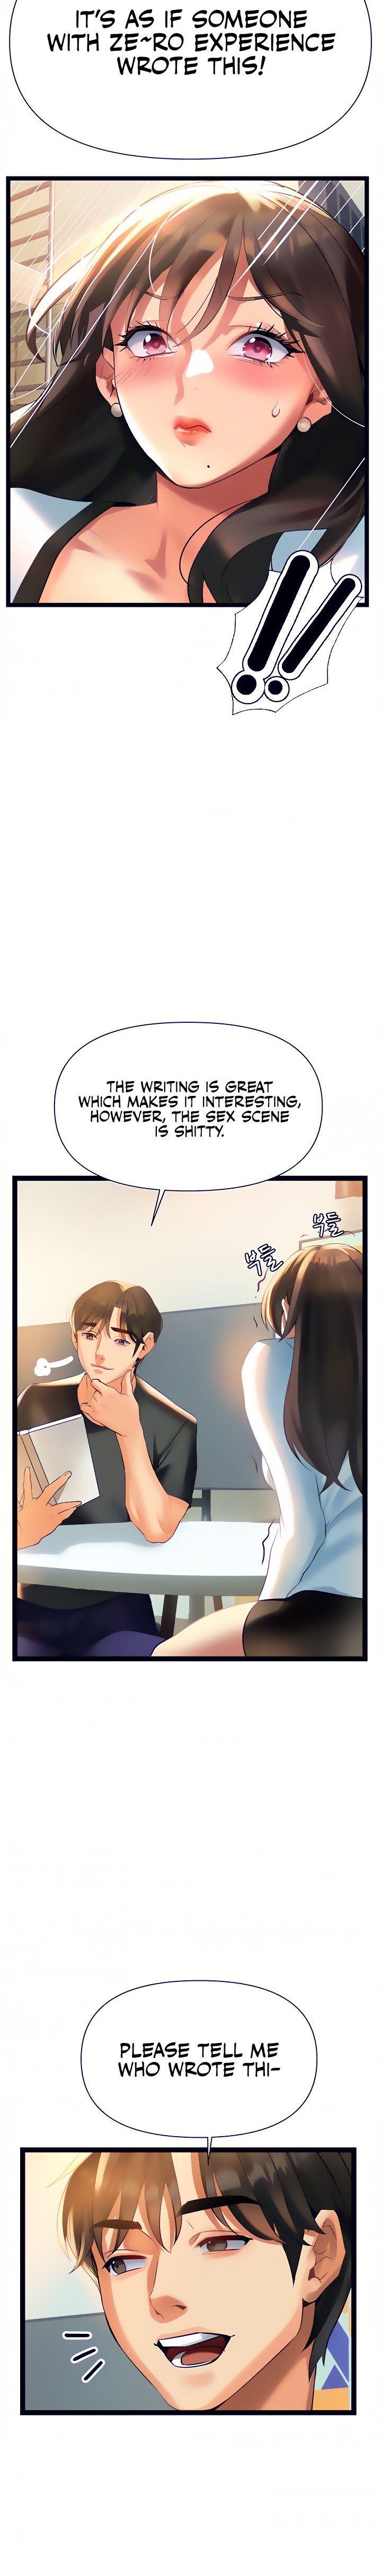 I Need You, Noona - Chapter 6 Page 20